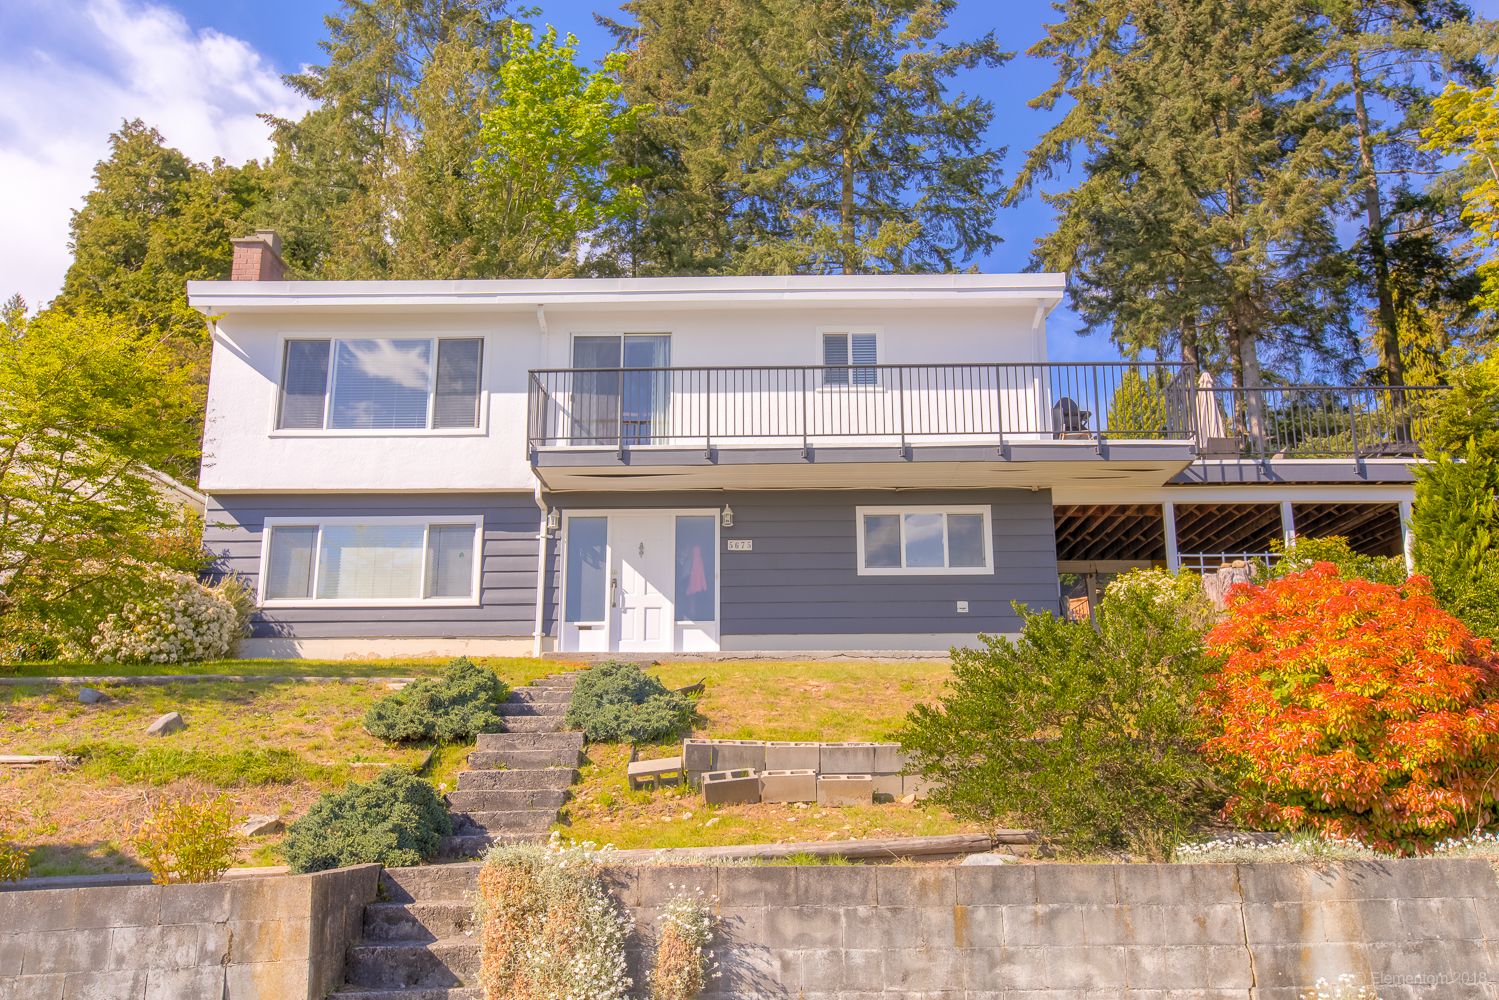 Main Photo: 5675 ELEANOR Street in Burnaby: South Slope House for sale (Burnaby South)  : MLS®# R2364026